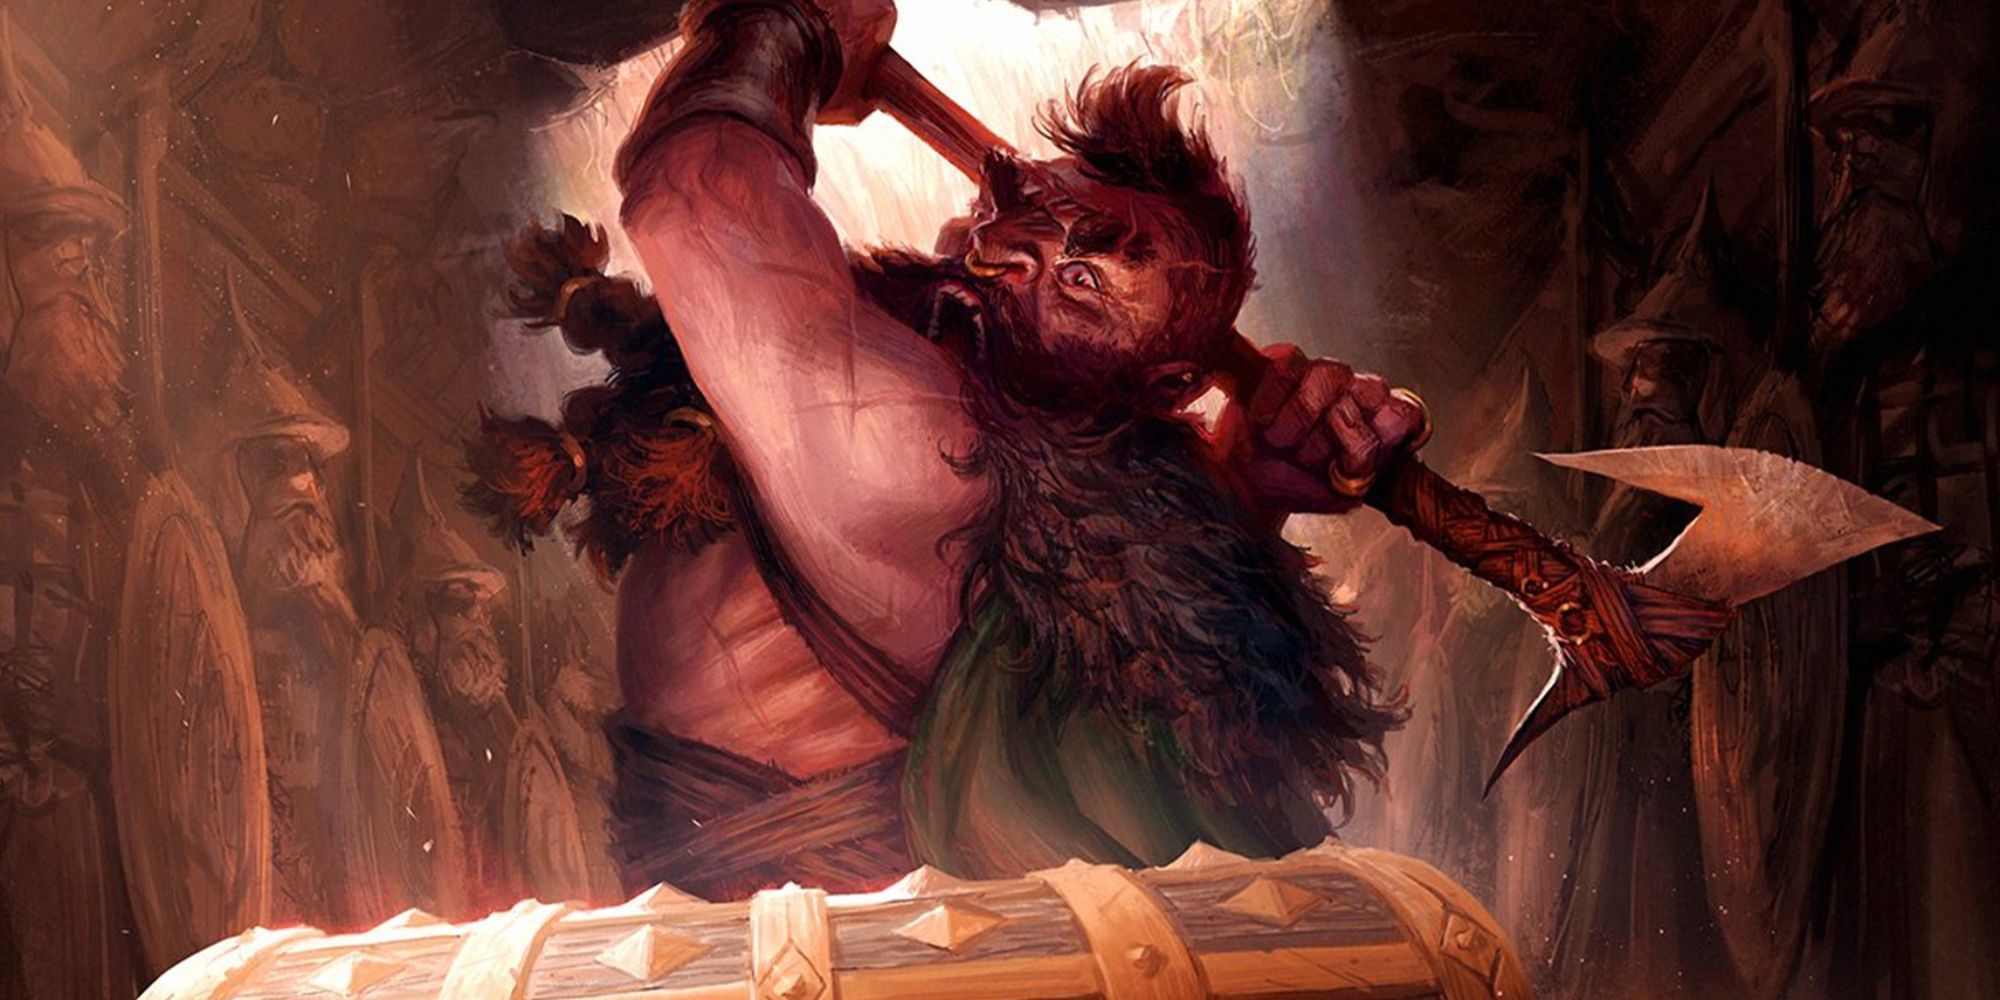 Plundering Barbarian by Andrew Mar, dwarf with a mad look attacking a chest with axe